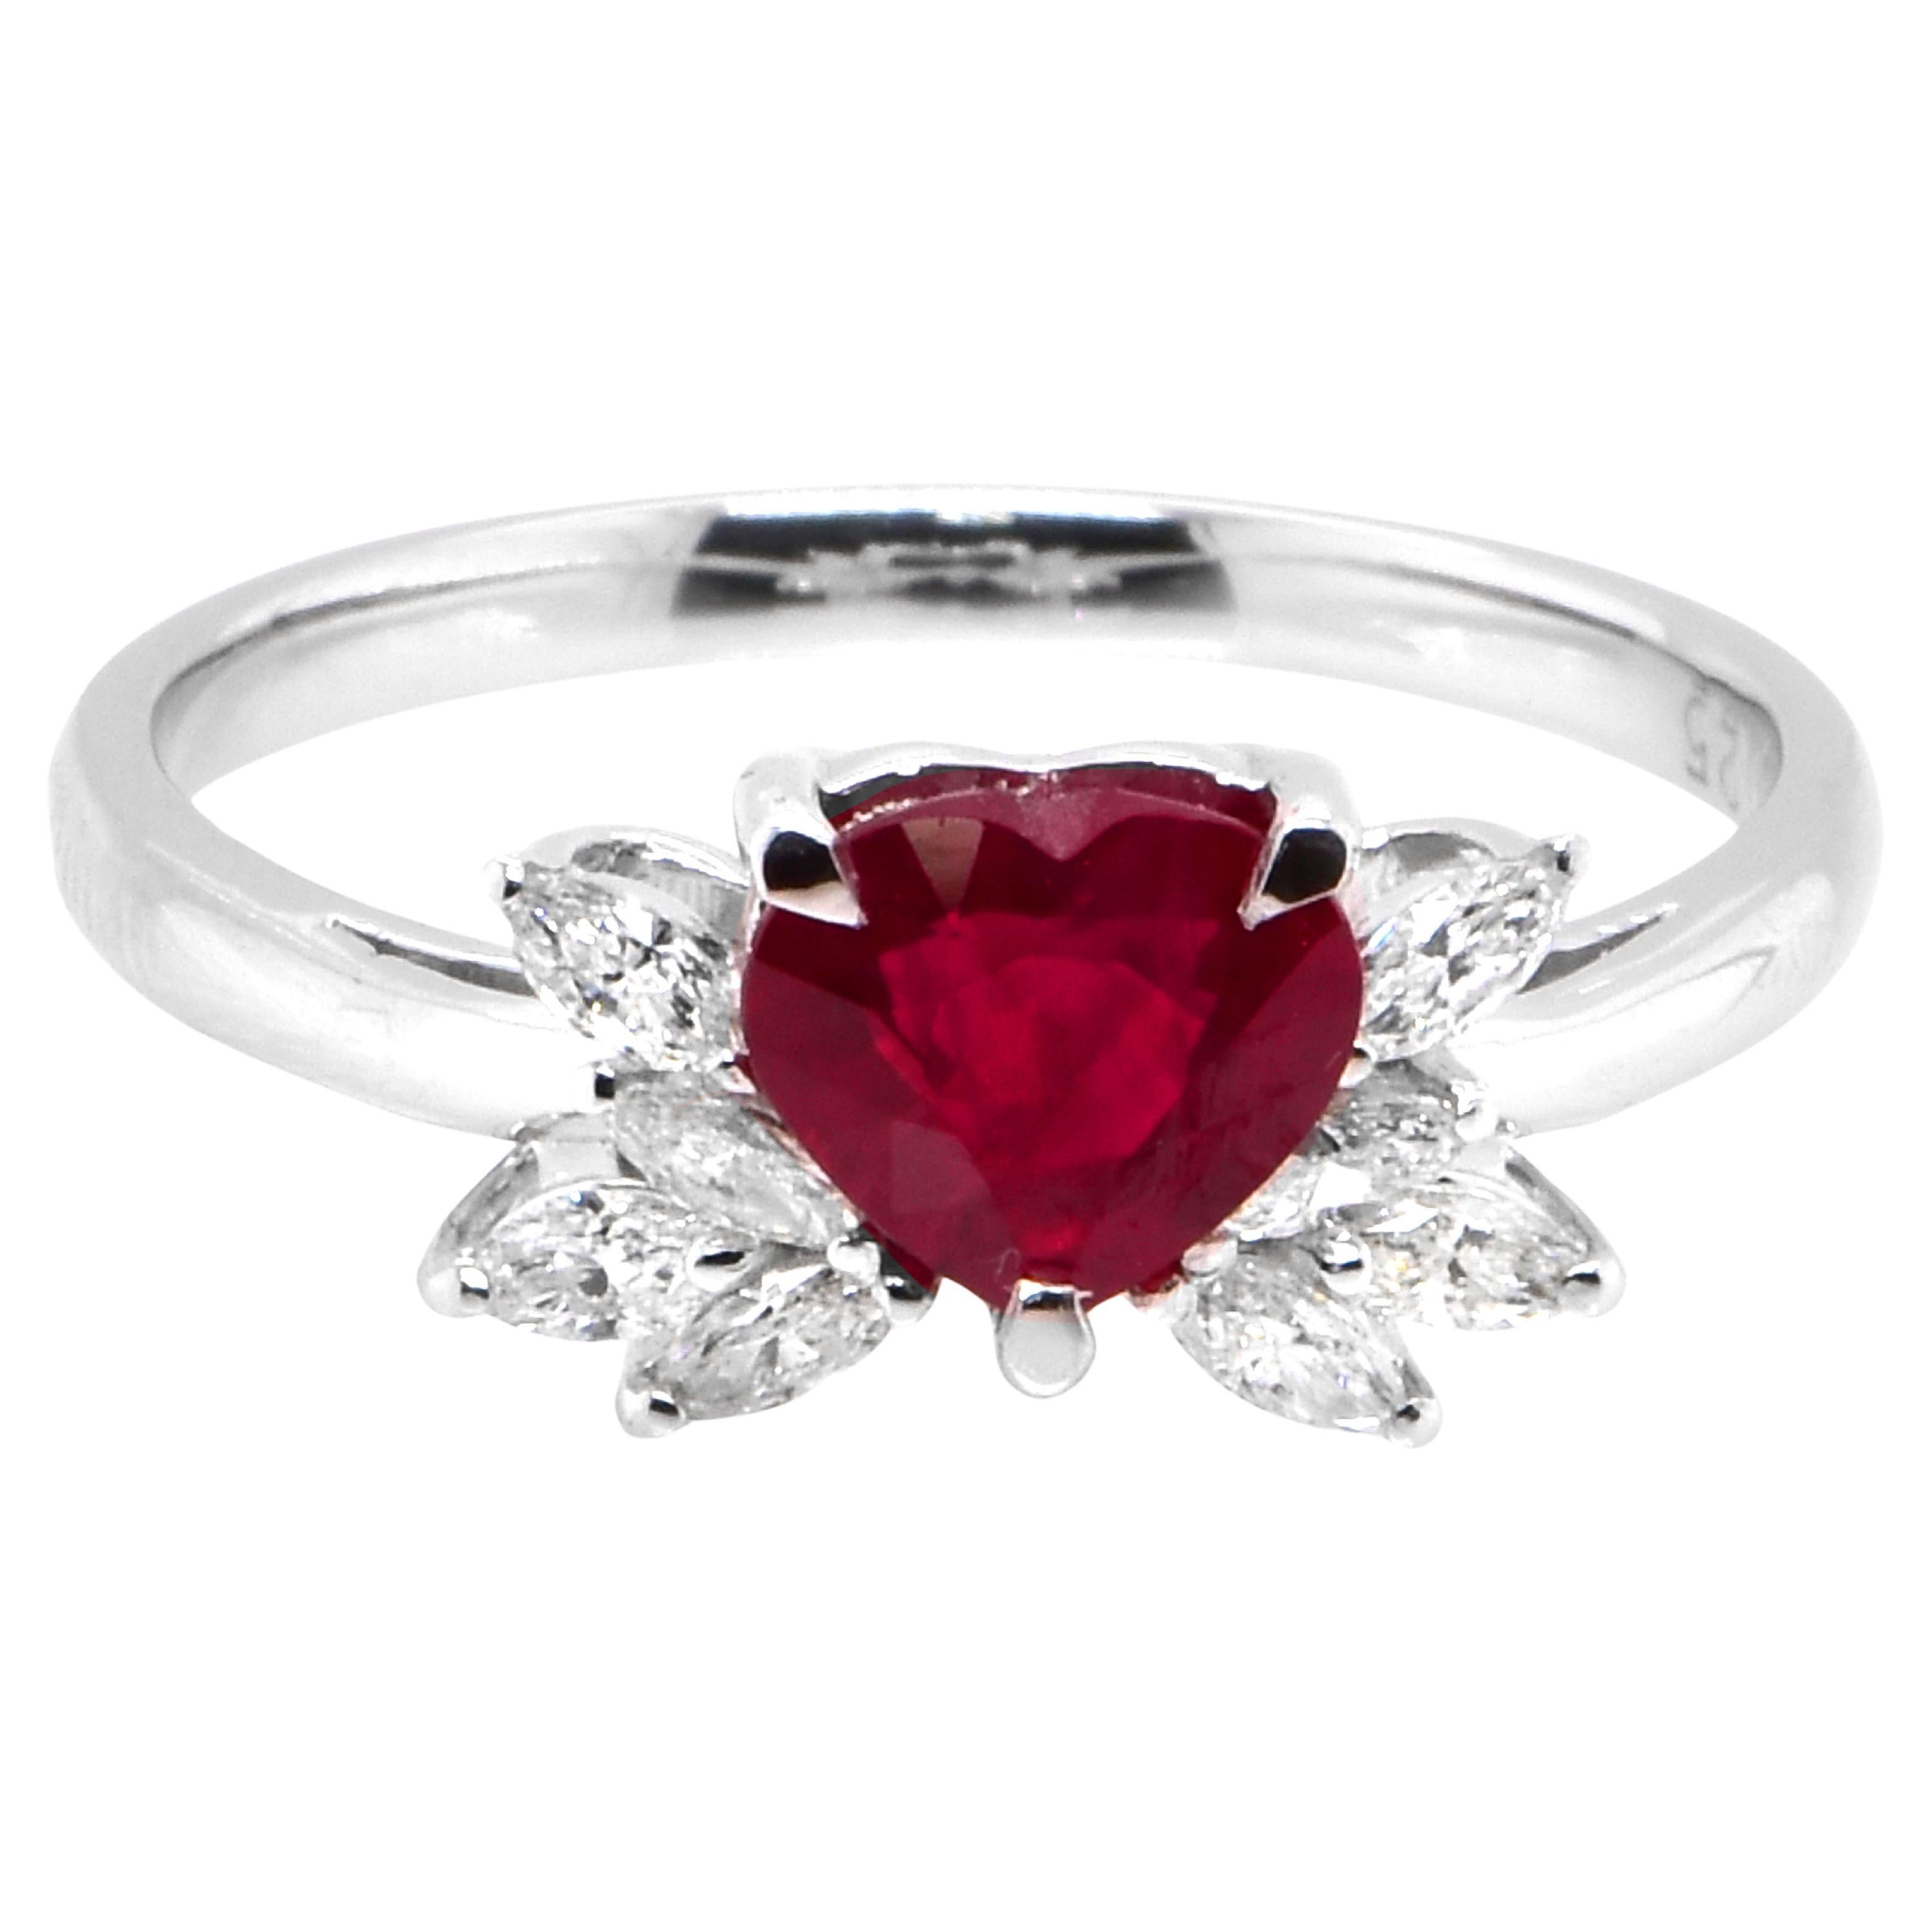 GIA Certified 1.04 Carat, Pigeon Blood Red, Burmese Ruby Ring Made in Platinum For Sale